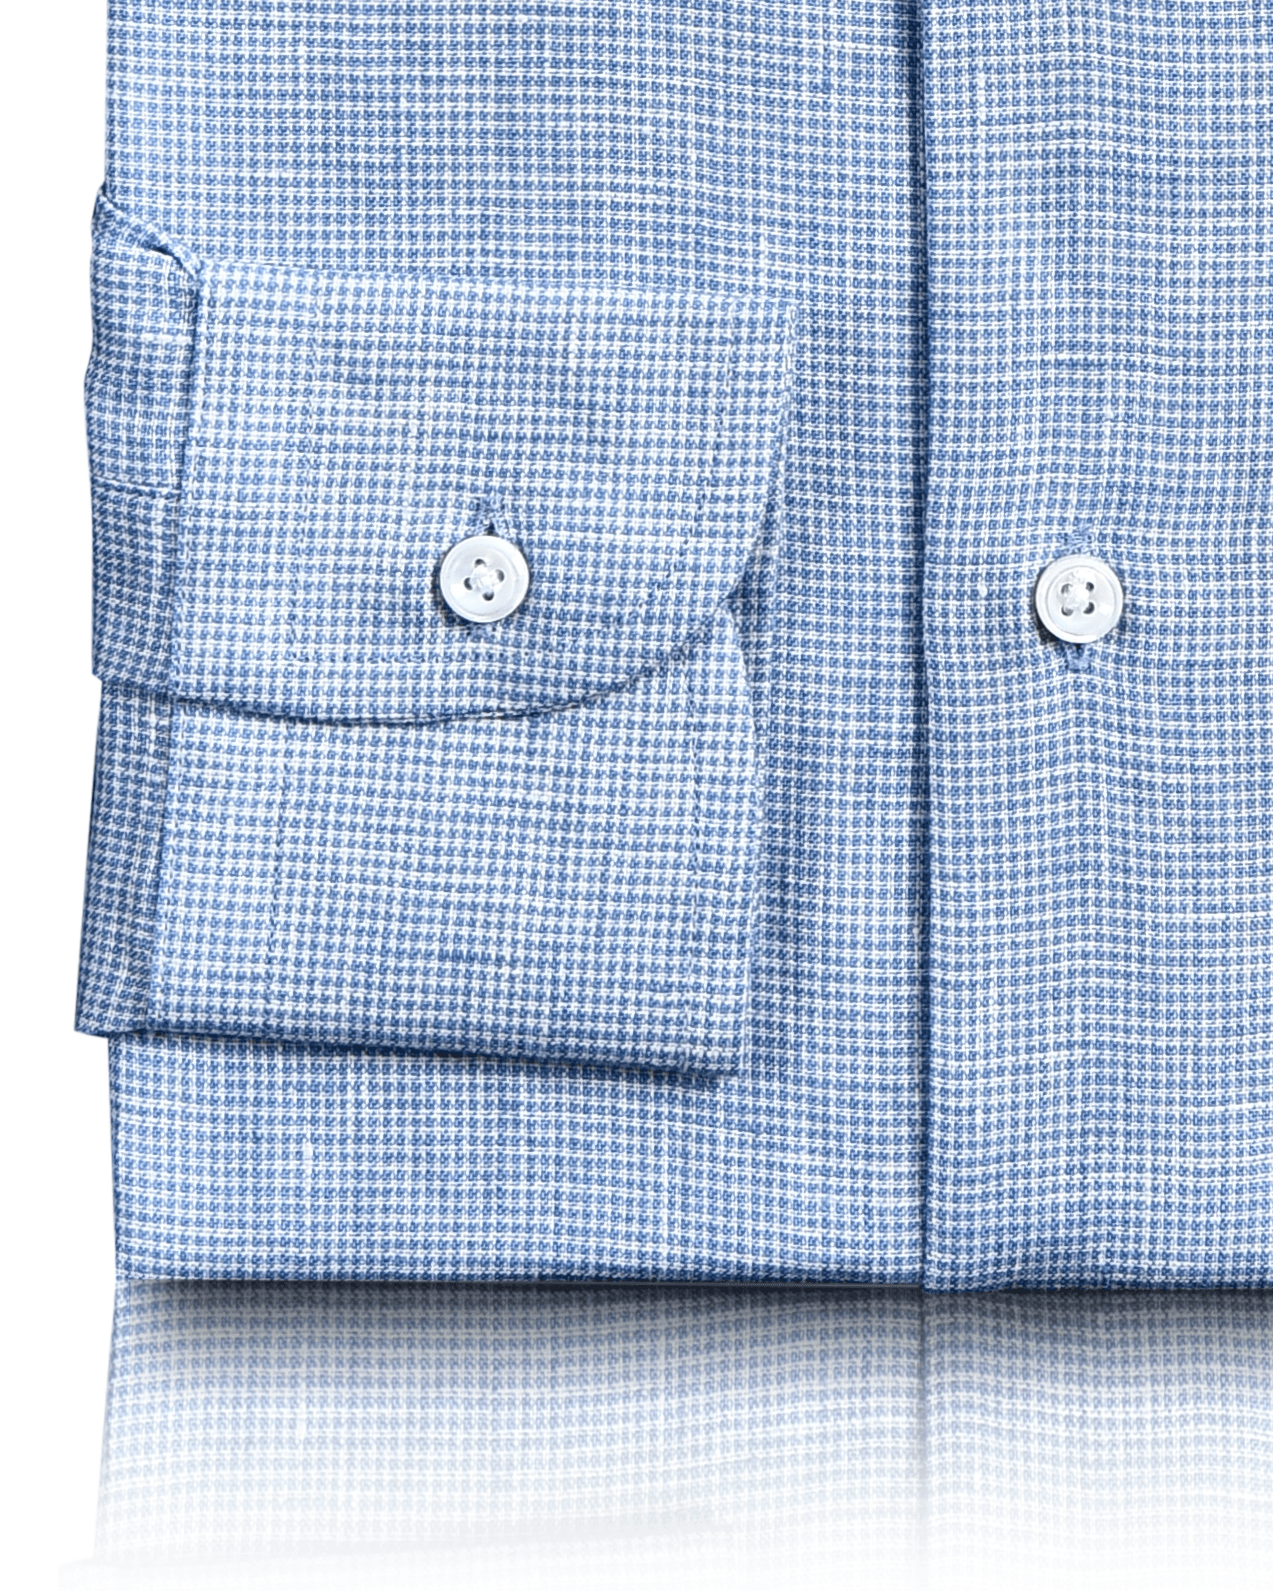 Cuff of custom linen shirt for men in white blue micro houndstooth